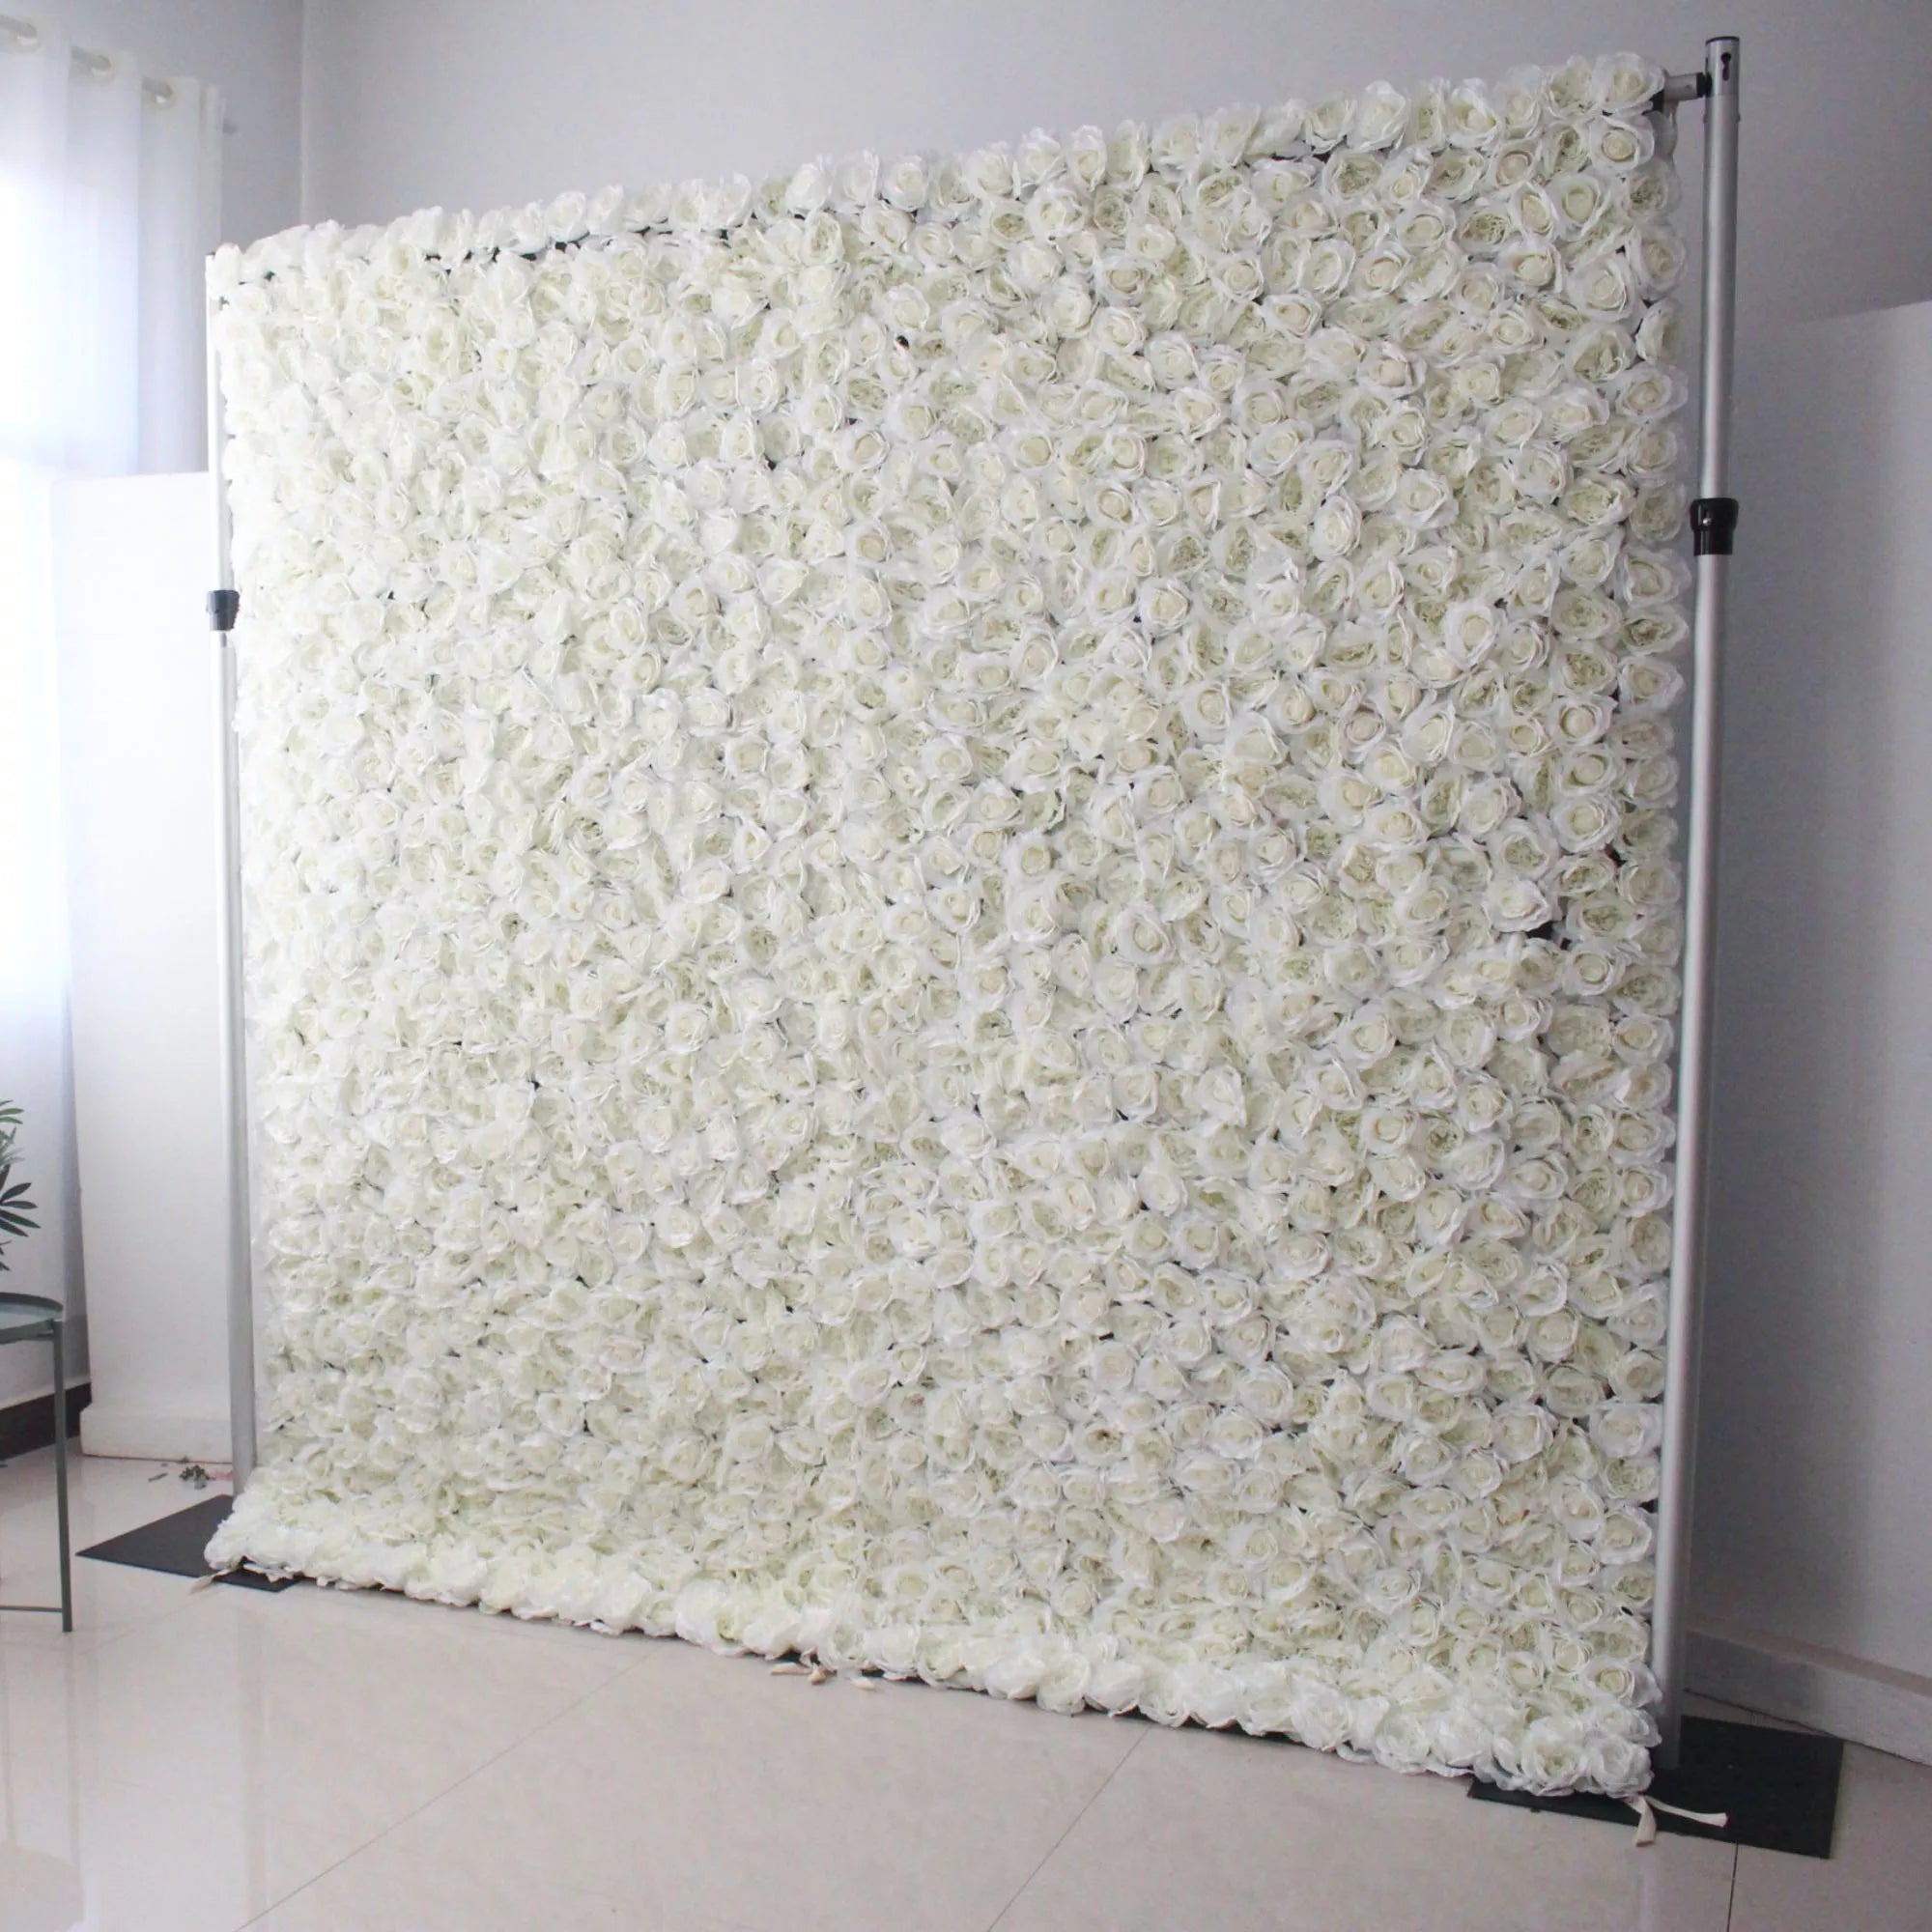 Valar Flowers Roll Up Fabric Artificial White Roses Flower Wall Wedding Backdrop, Floral Party Decor, Event Photography-VF-026